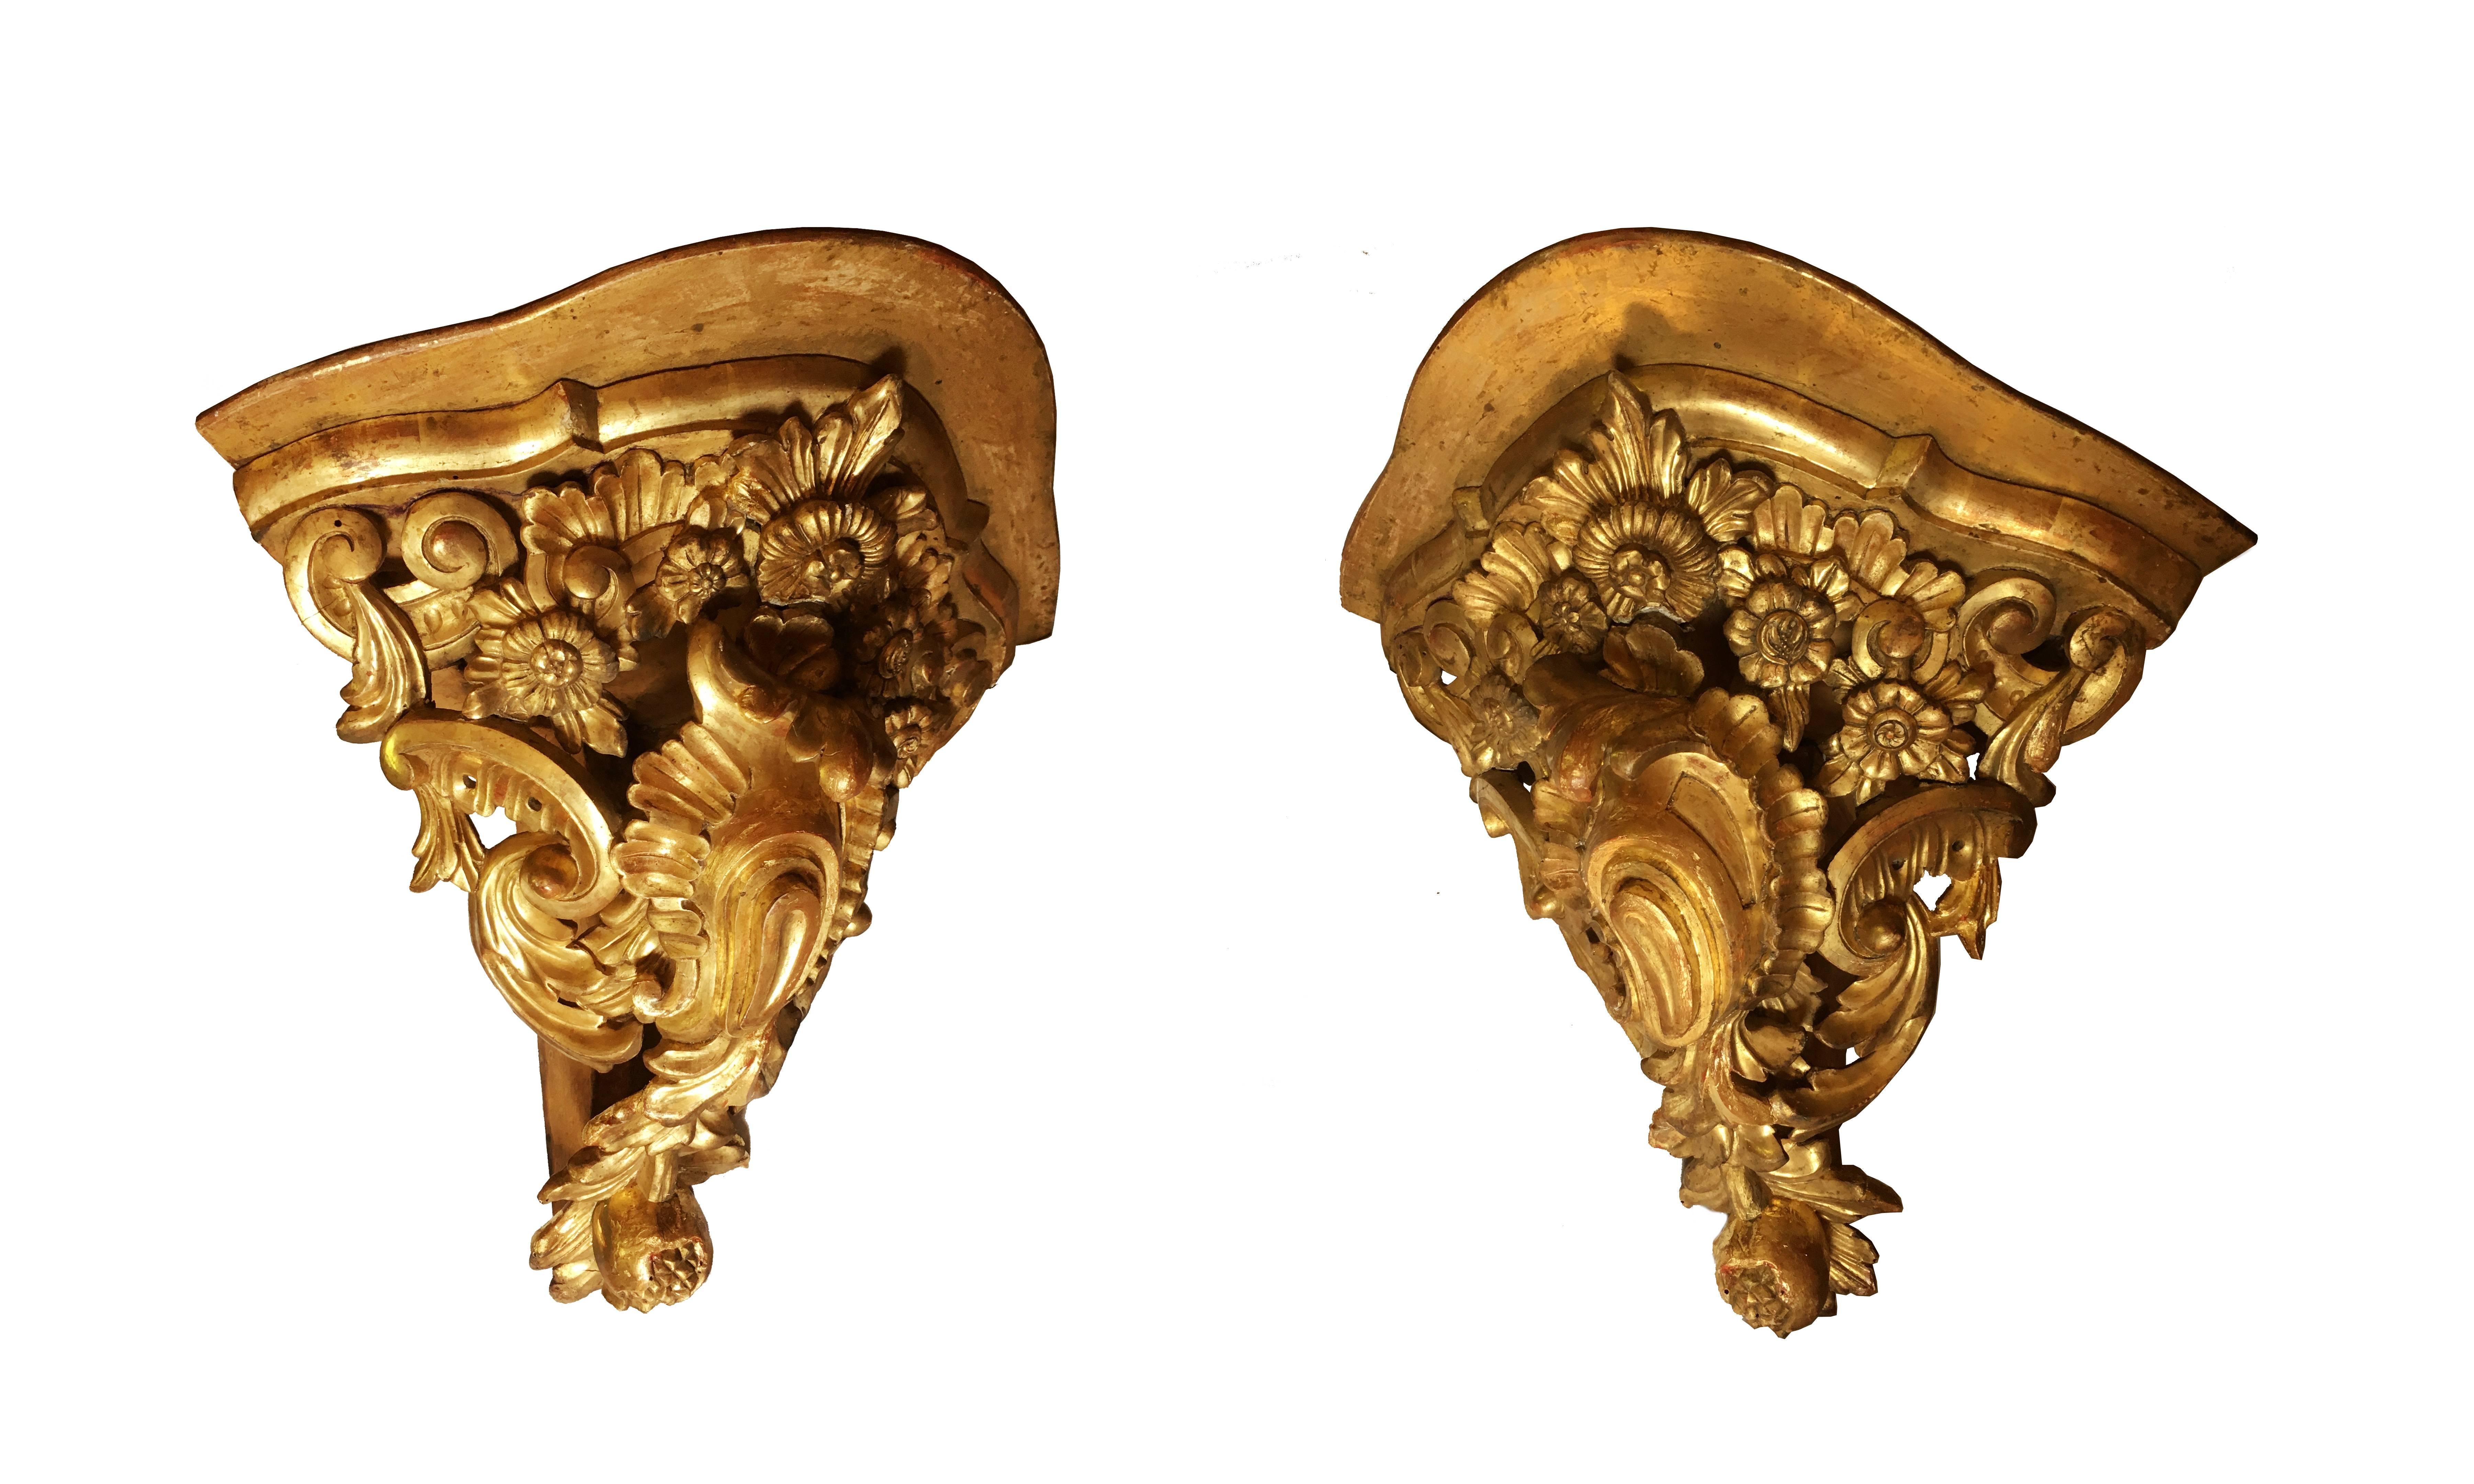 An exceptionally fine pair of Baroque wall brackets. Water gilded with excellent patina with the gold subtly transparent showing its rich red bole, the brackets are rare both for their complexity and large size. An oyster shell shaped cartouche